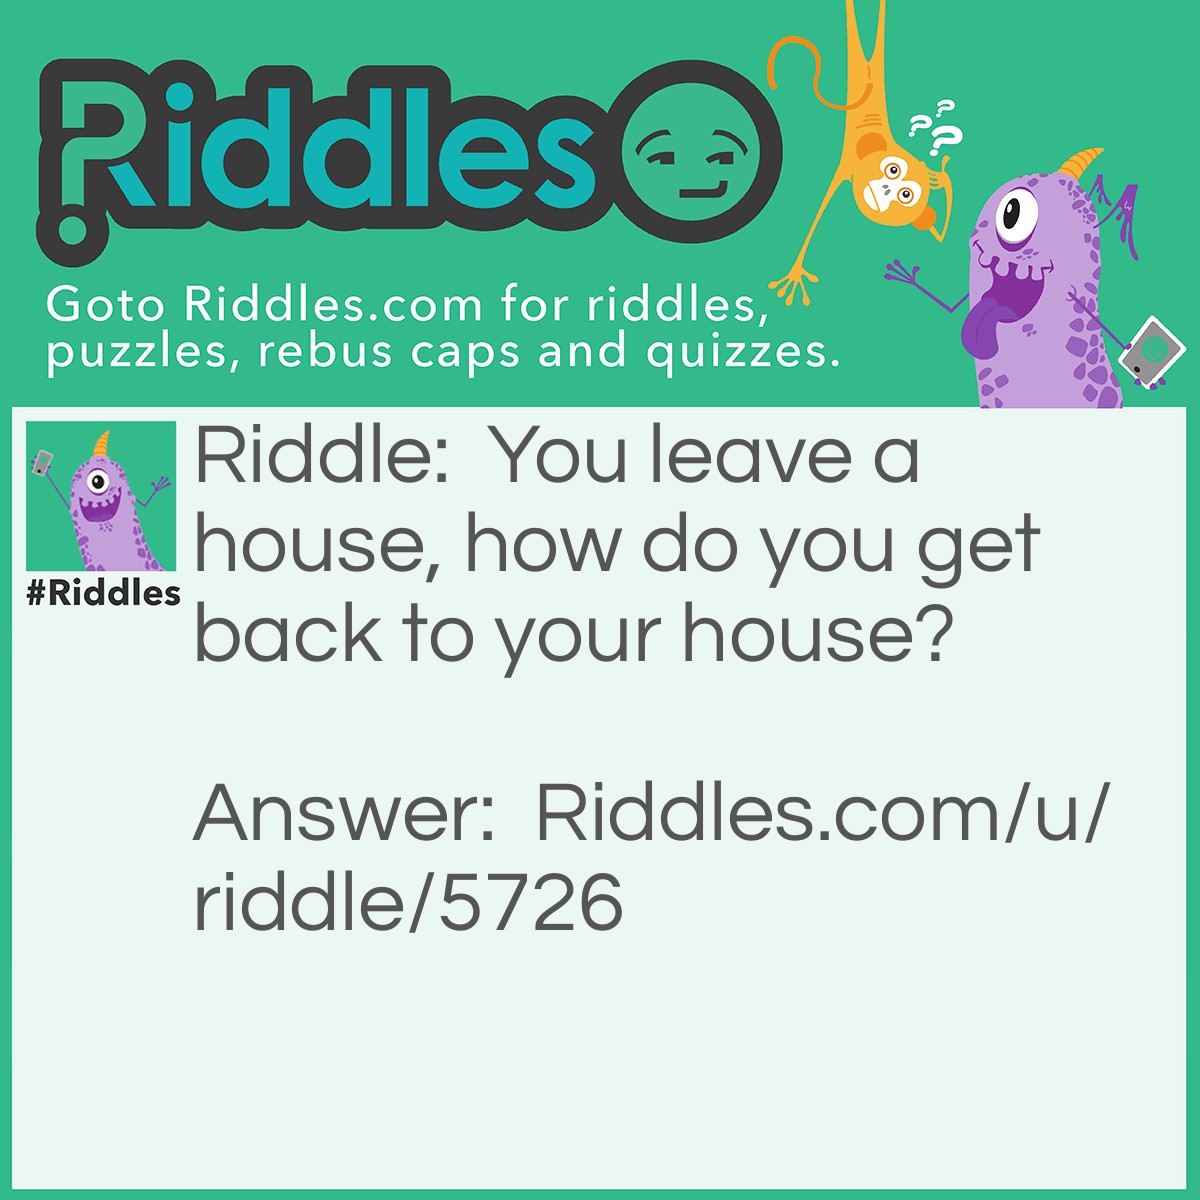 Riddle: You leave a house, how do you get back to your house? Answer: You drive since it said A house, not your house, ther for your house is somewhere else.